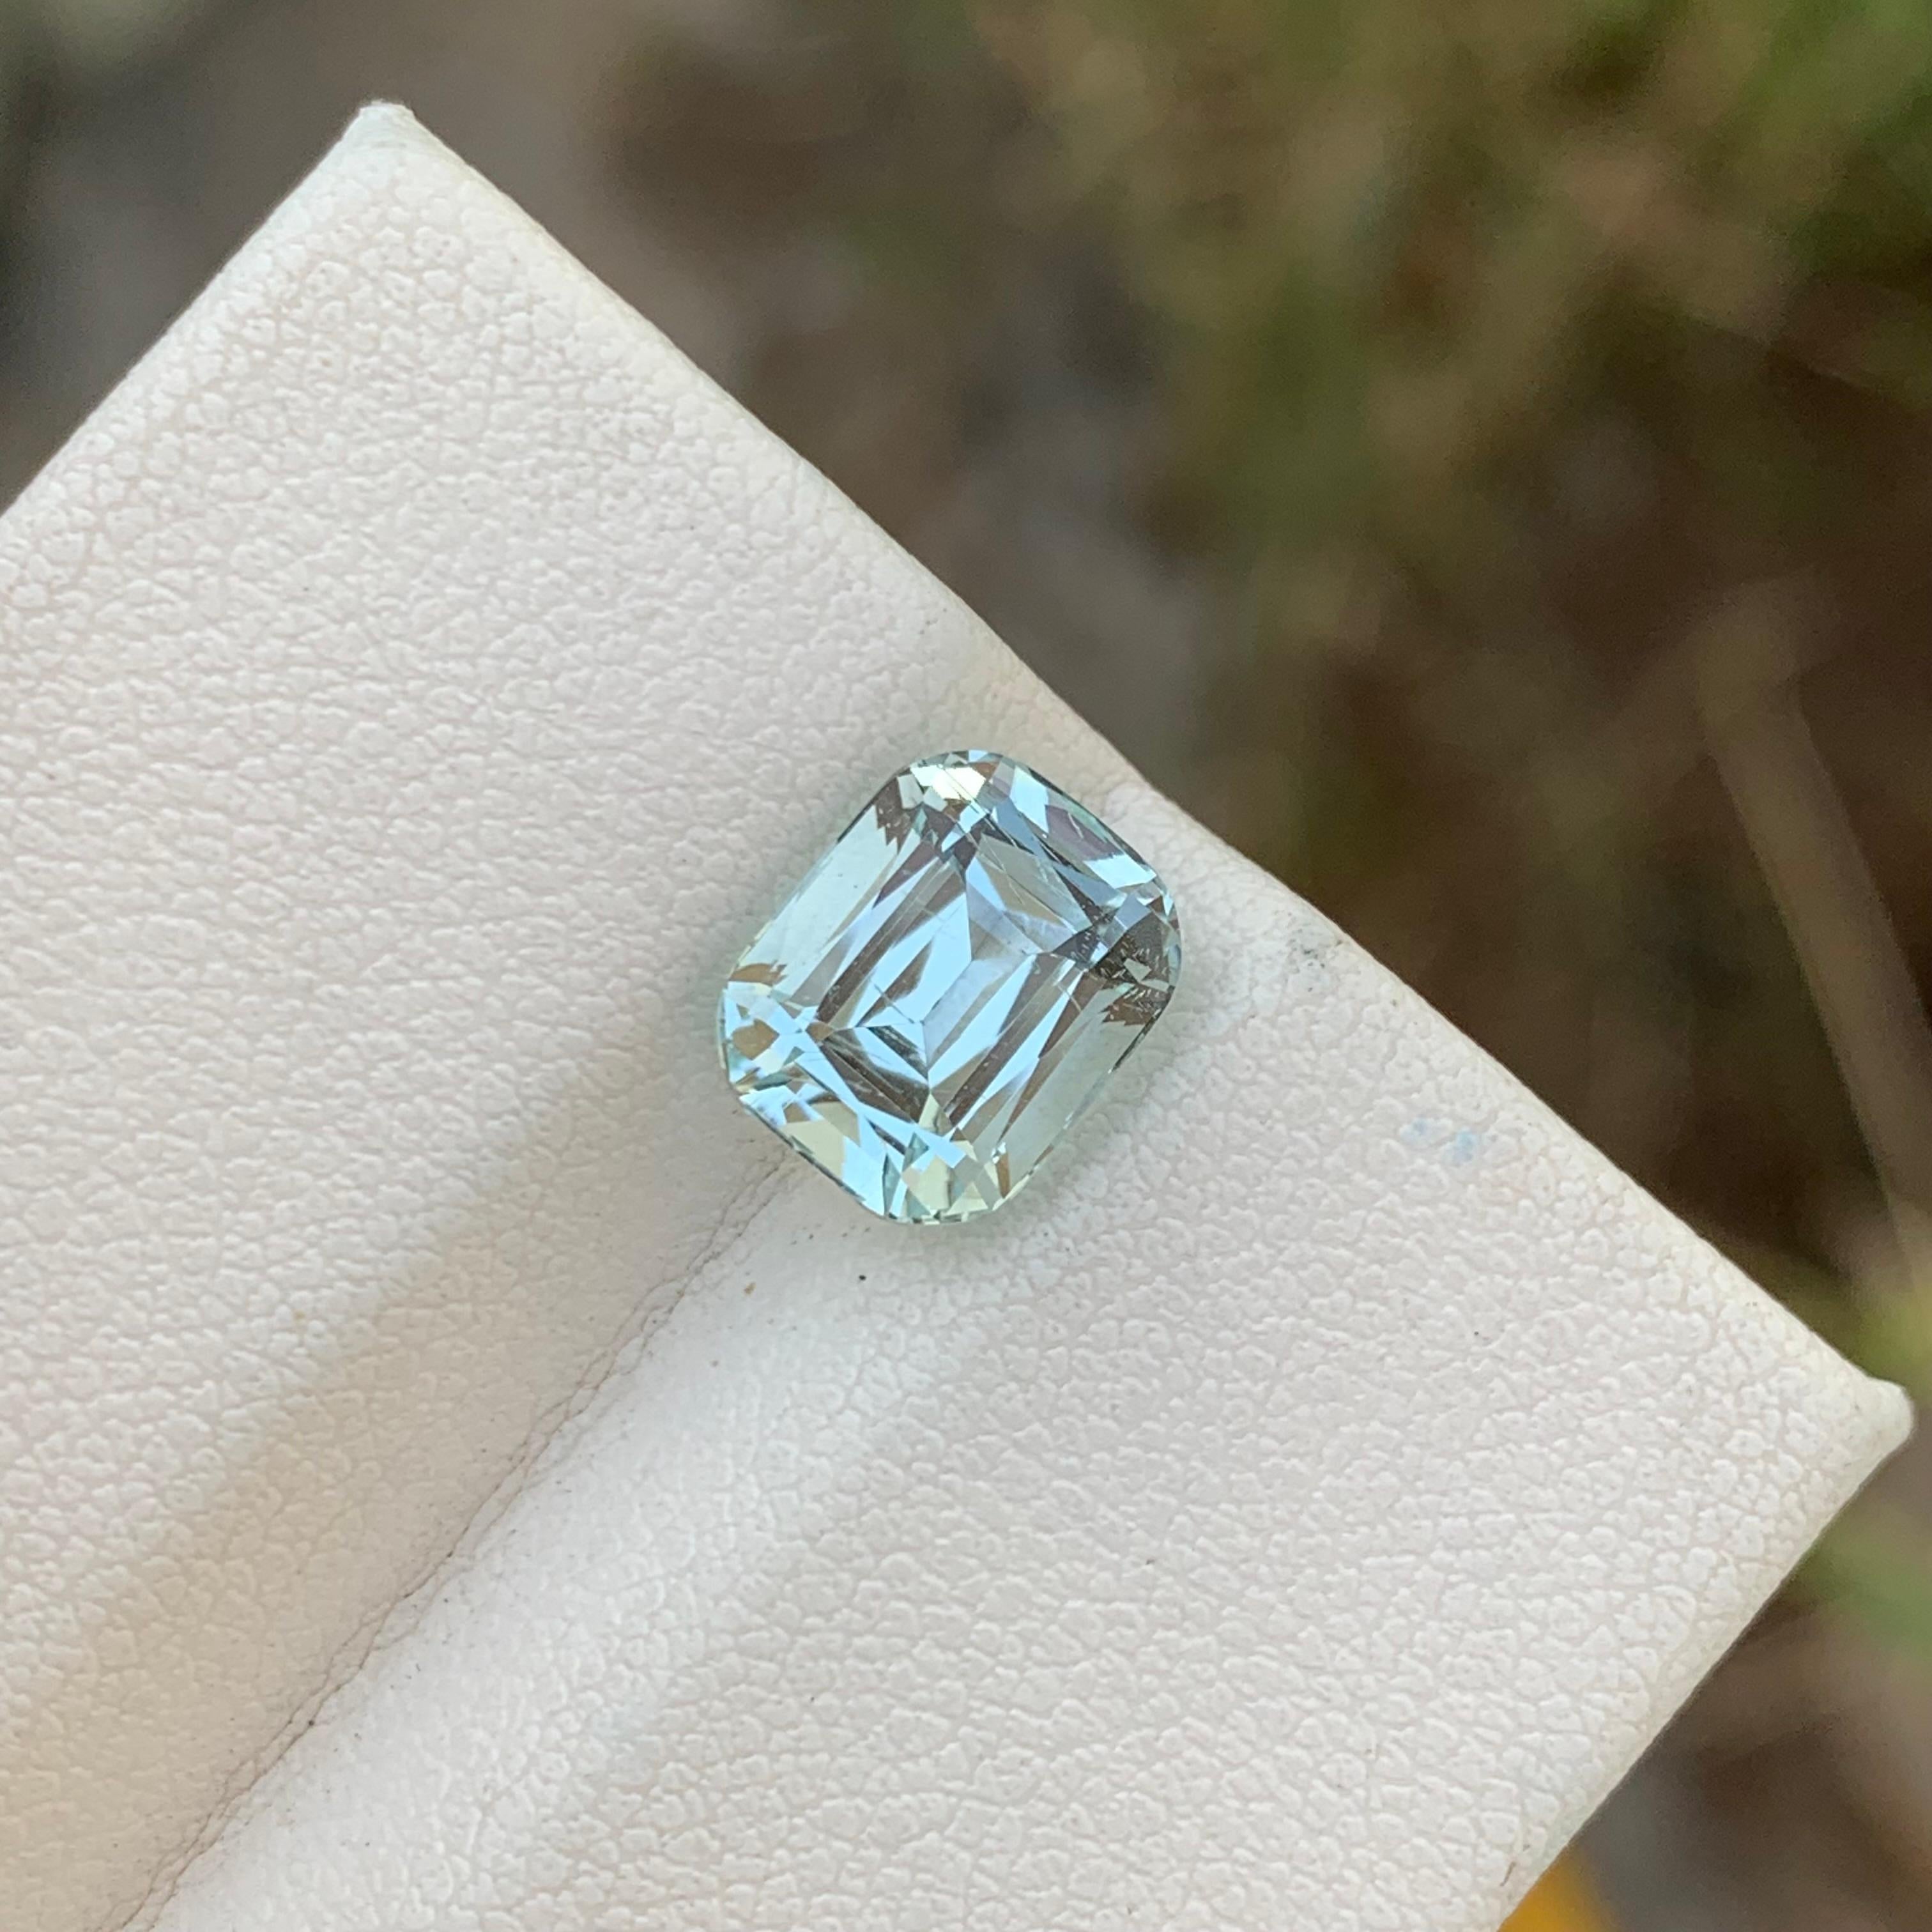 Anglo-Indian 2.90 Carat Natural Faceted Aquamarine Cushion Cut From Pakistan Mine For Sale